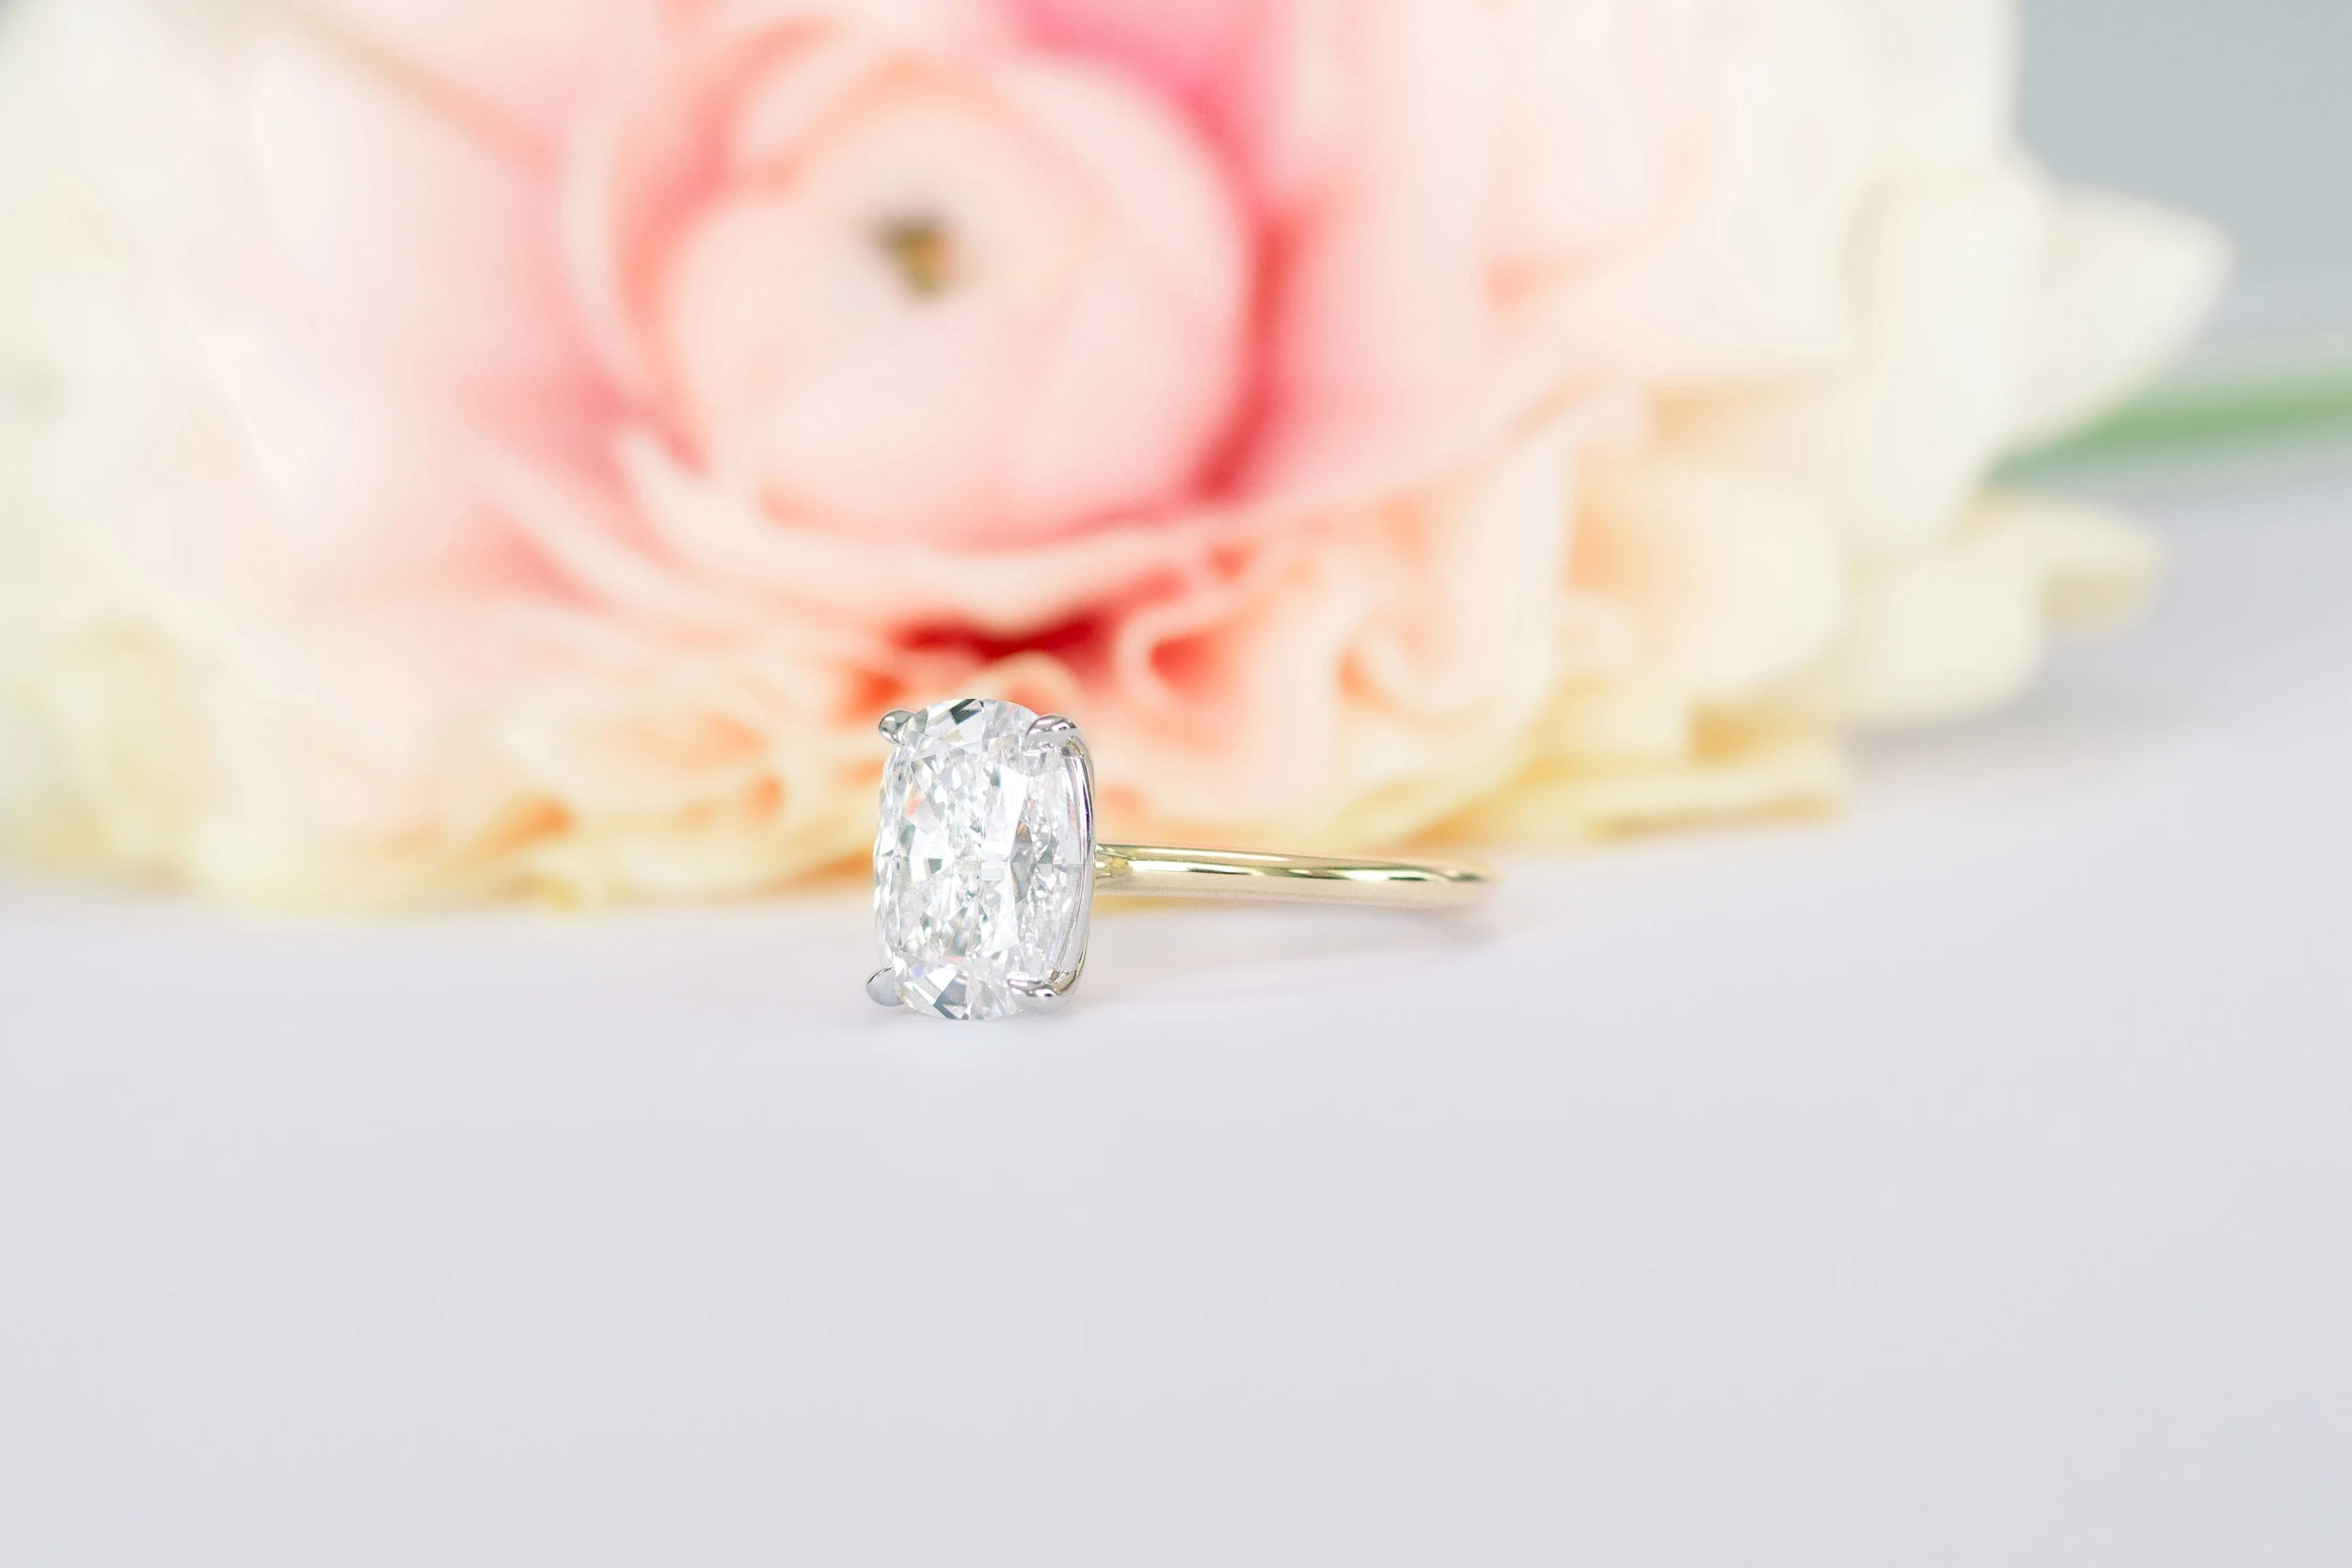 3.0 ct Created Diamonds set in Platinum & Yellow Gold Cushion Petite Four Prong Solitaire (Side View)